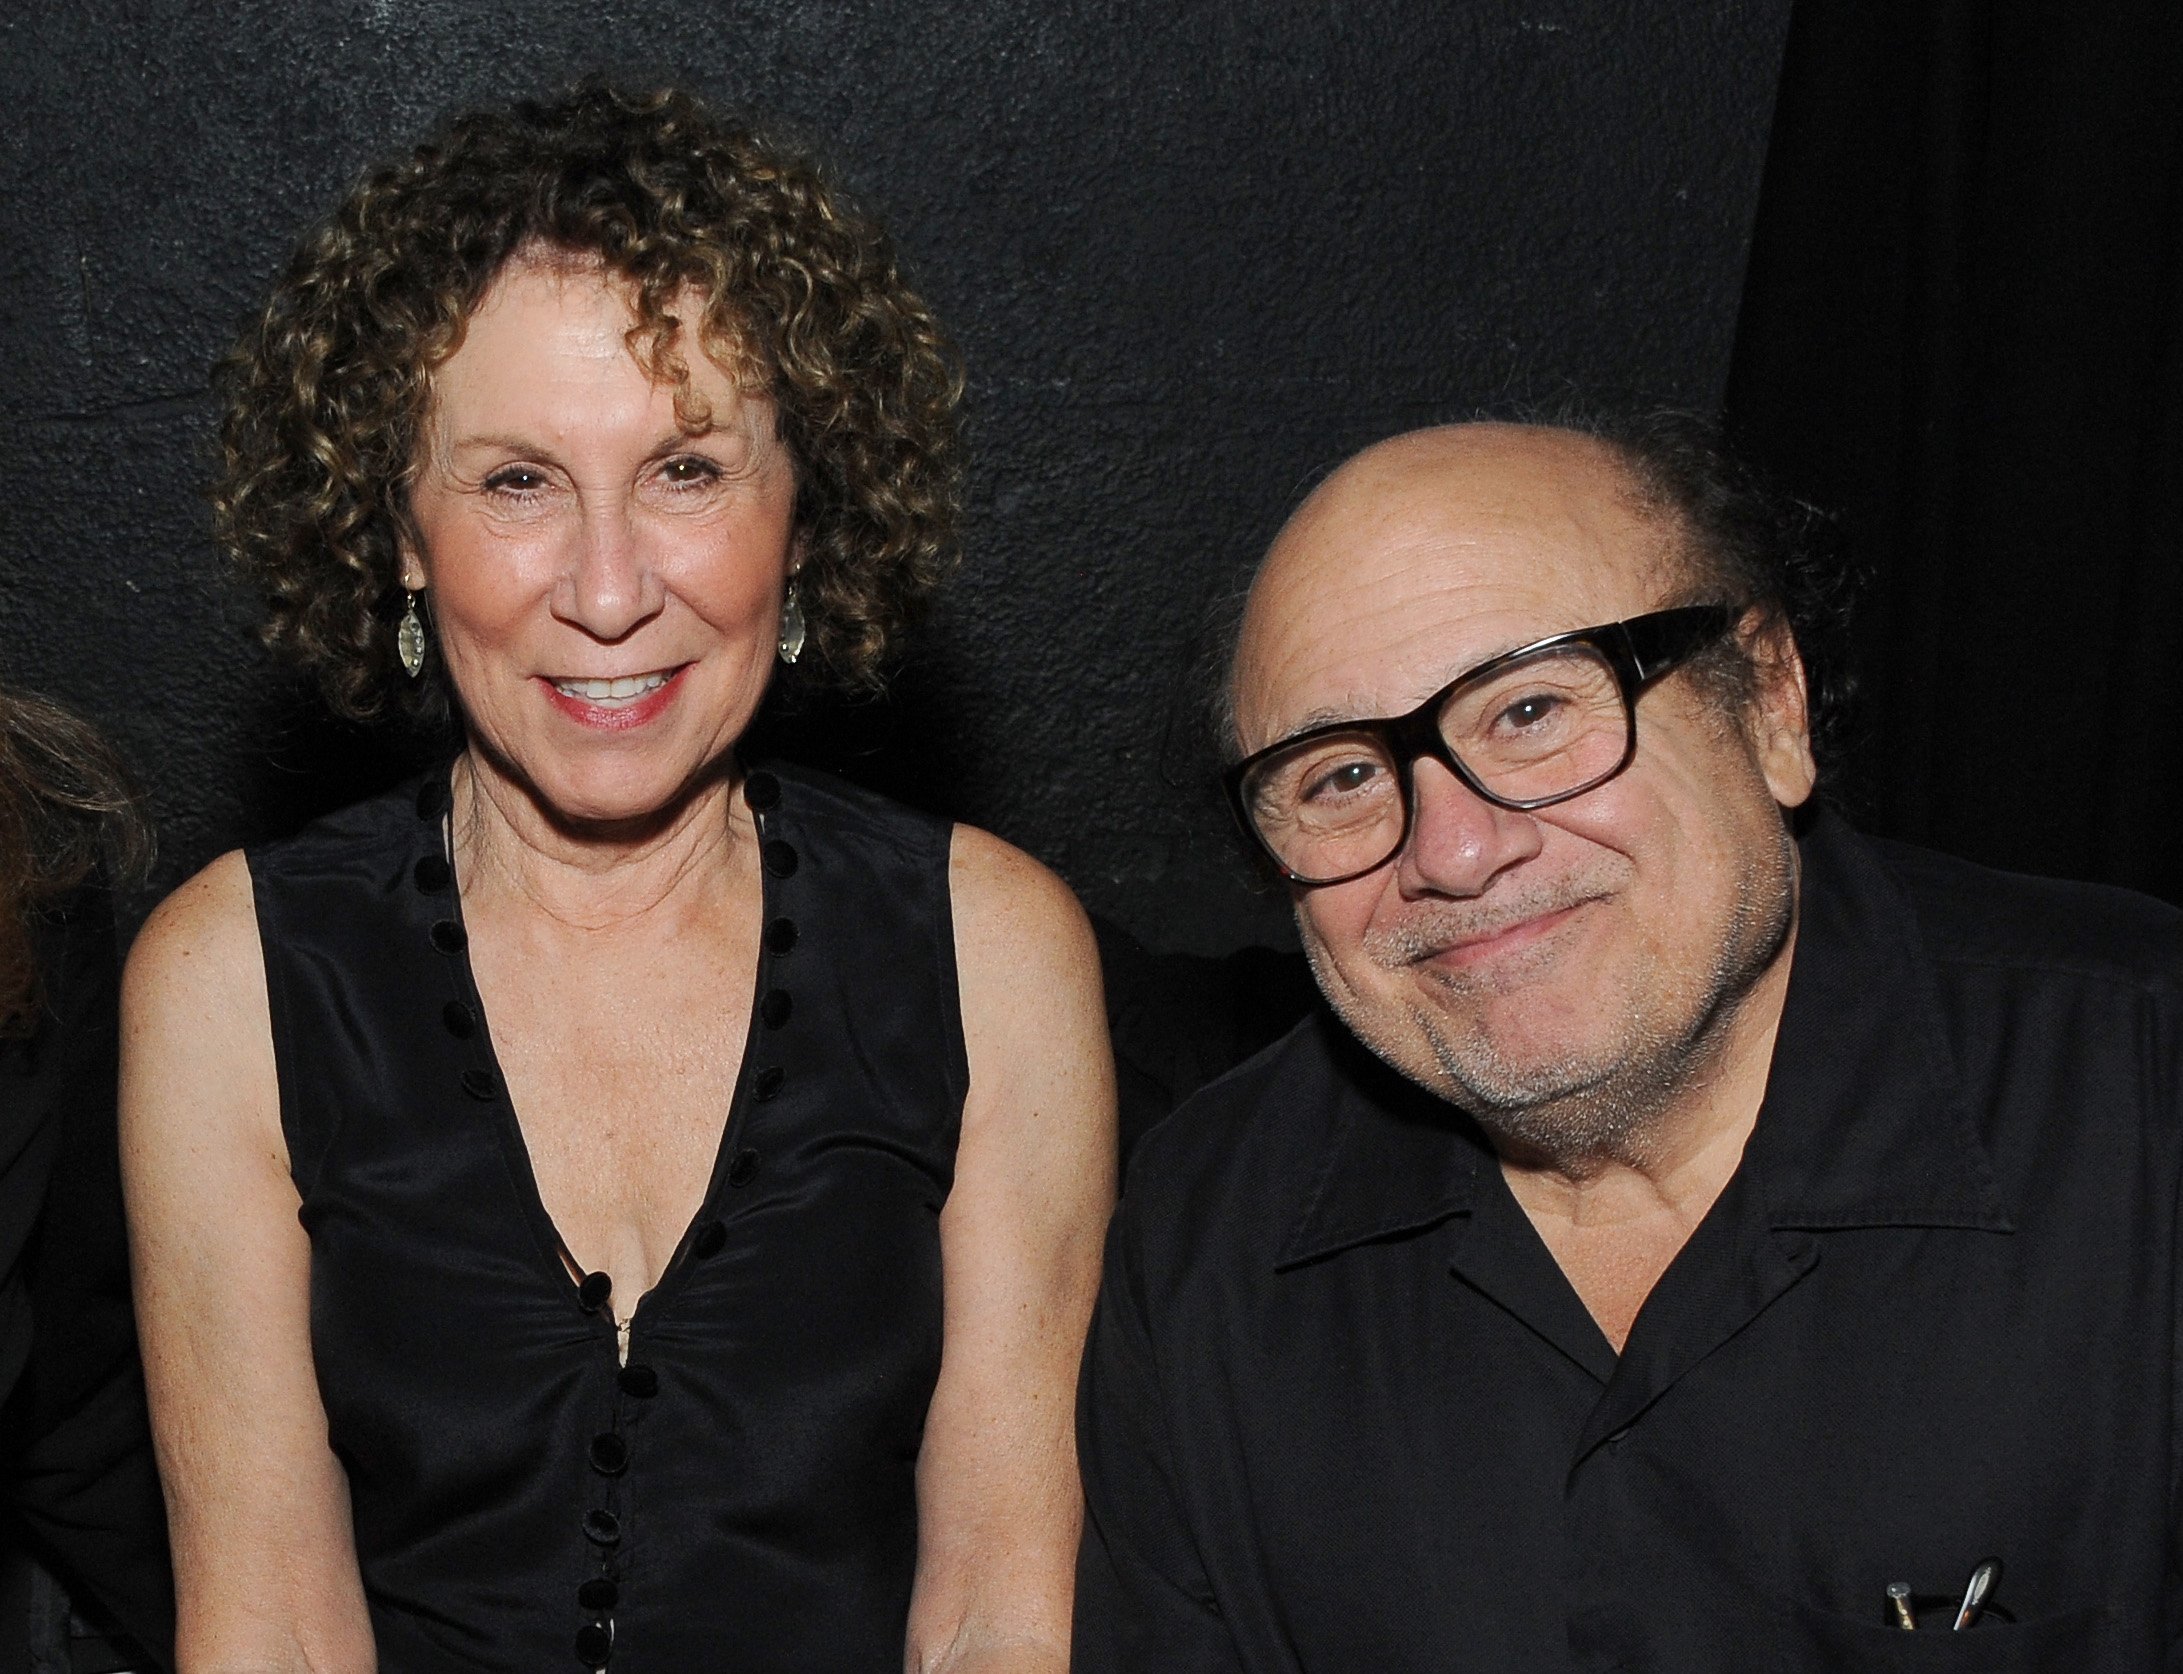 Rhea Perlman and Danny DeVito attend the International Myeloma Foundation 8th Annual Comedy Celebration on November 8, 2014, in Los Angeles, California. | Getty Images.